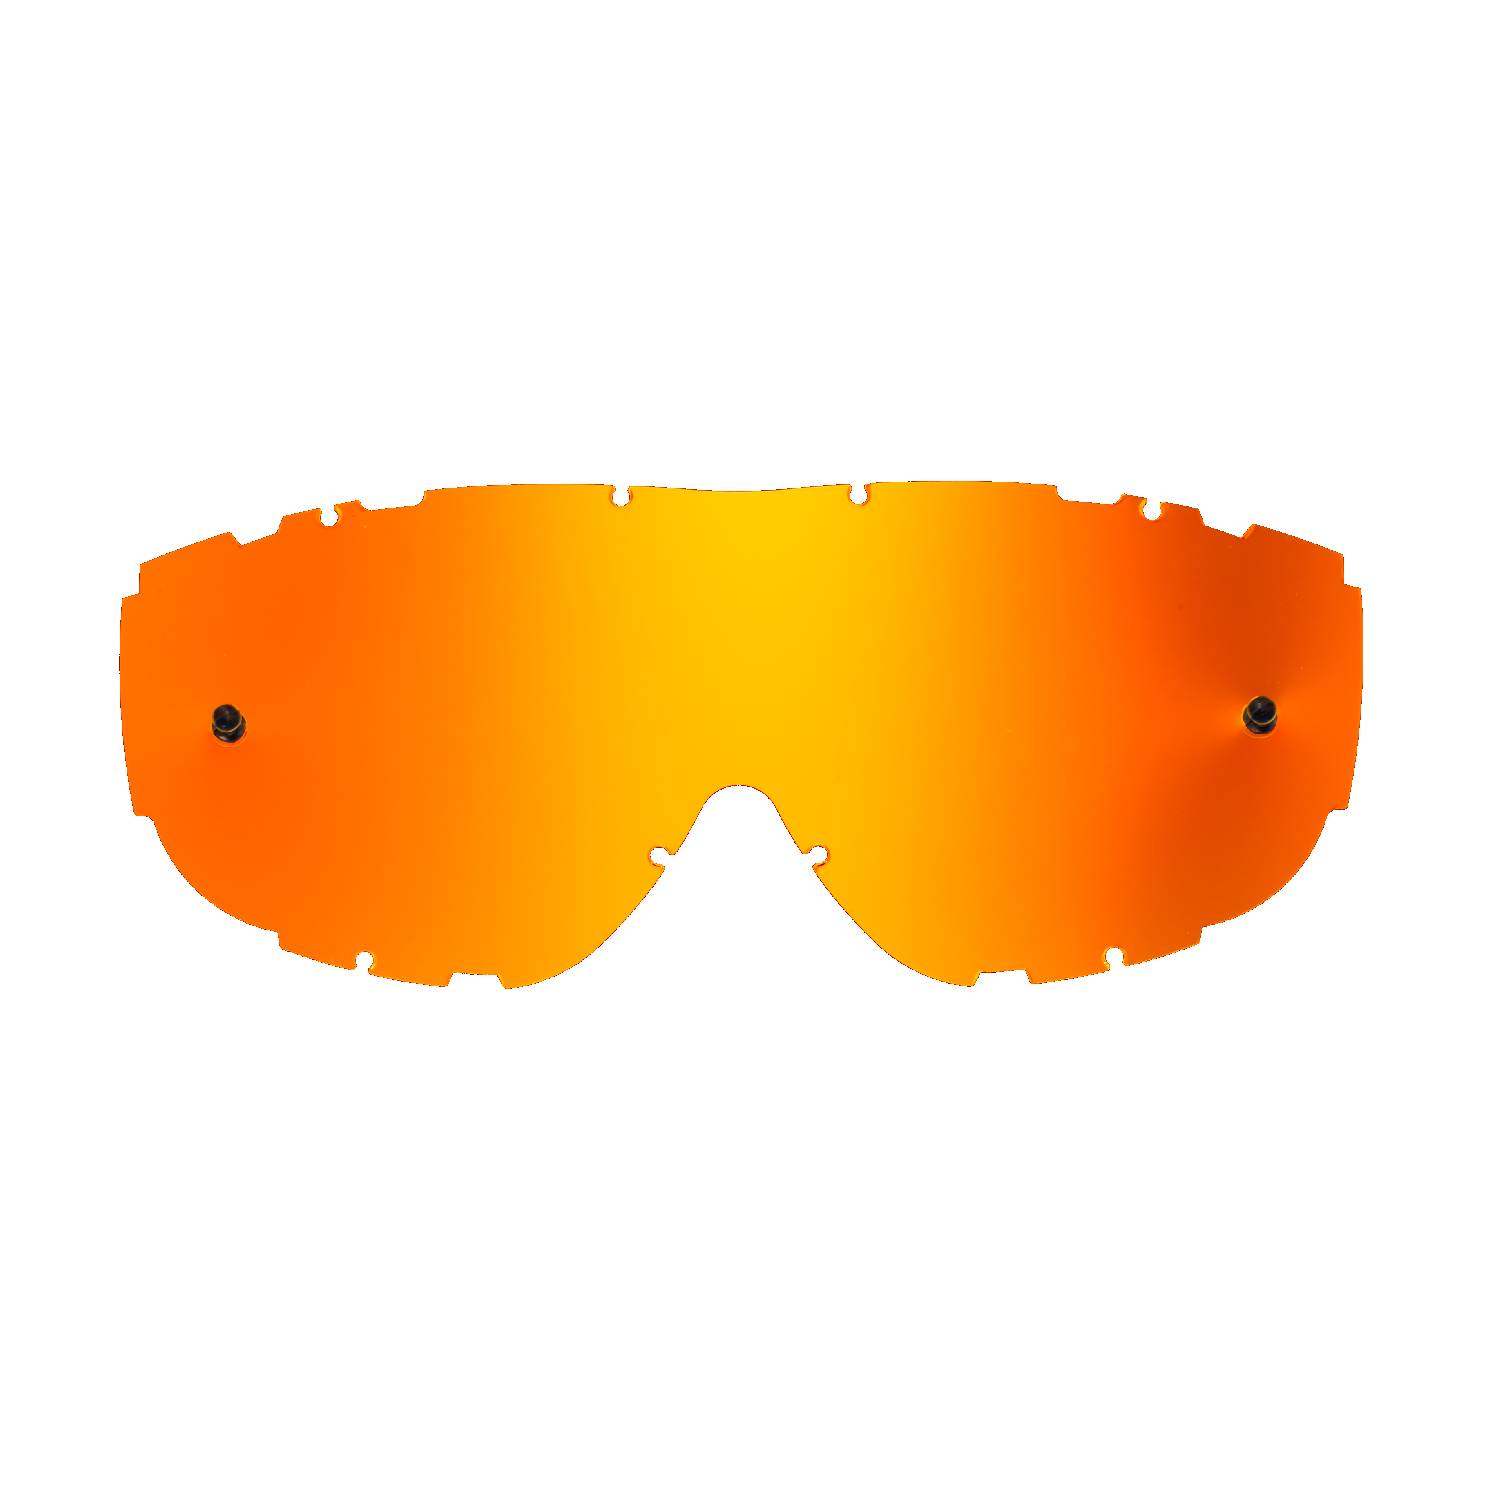 orange-toned mirrored replacement lenses for goggles compatible for Smith Piston goggle